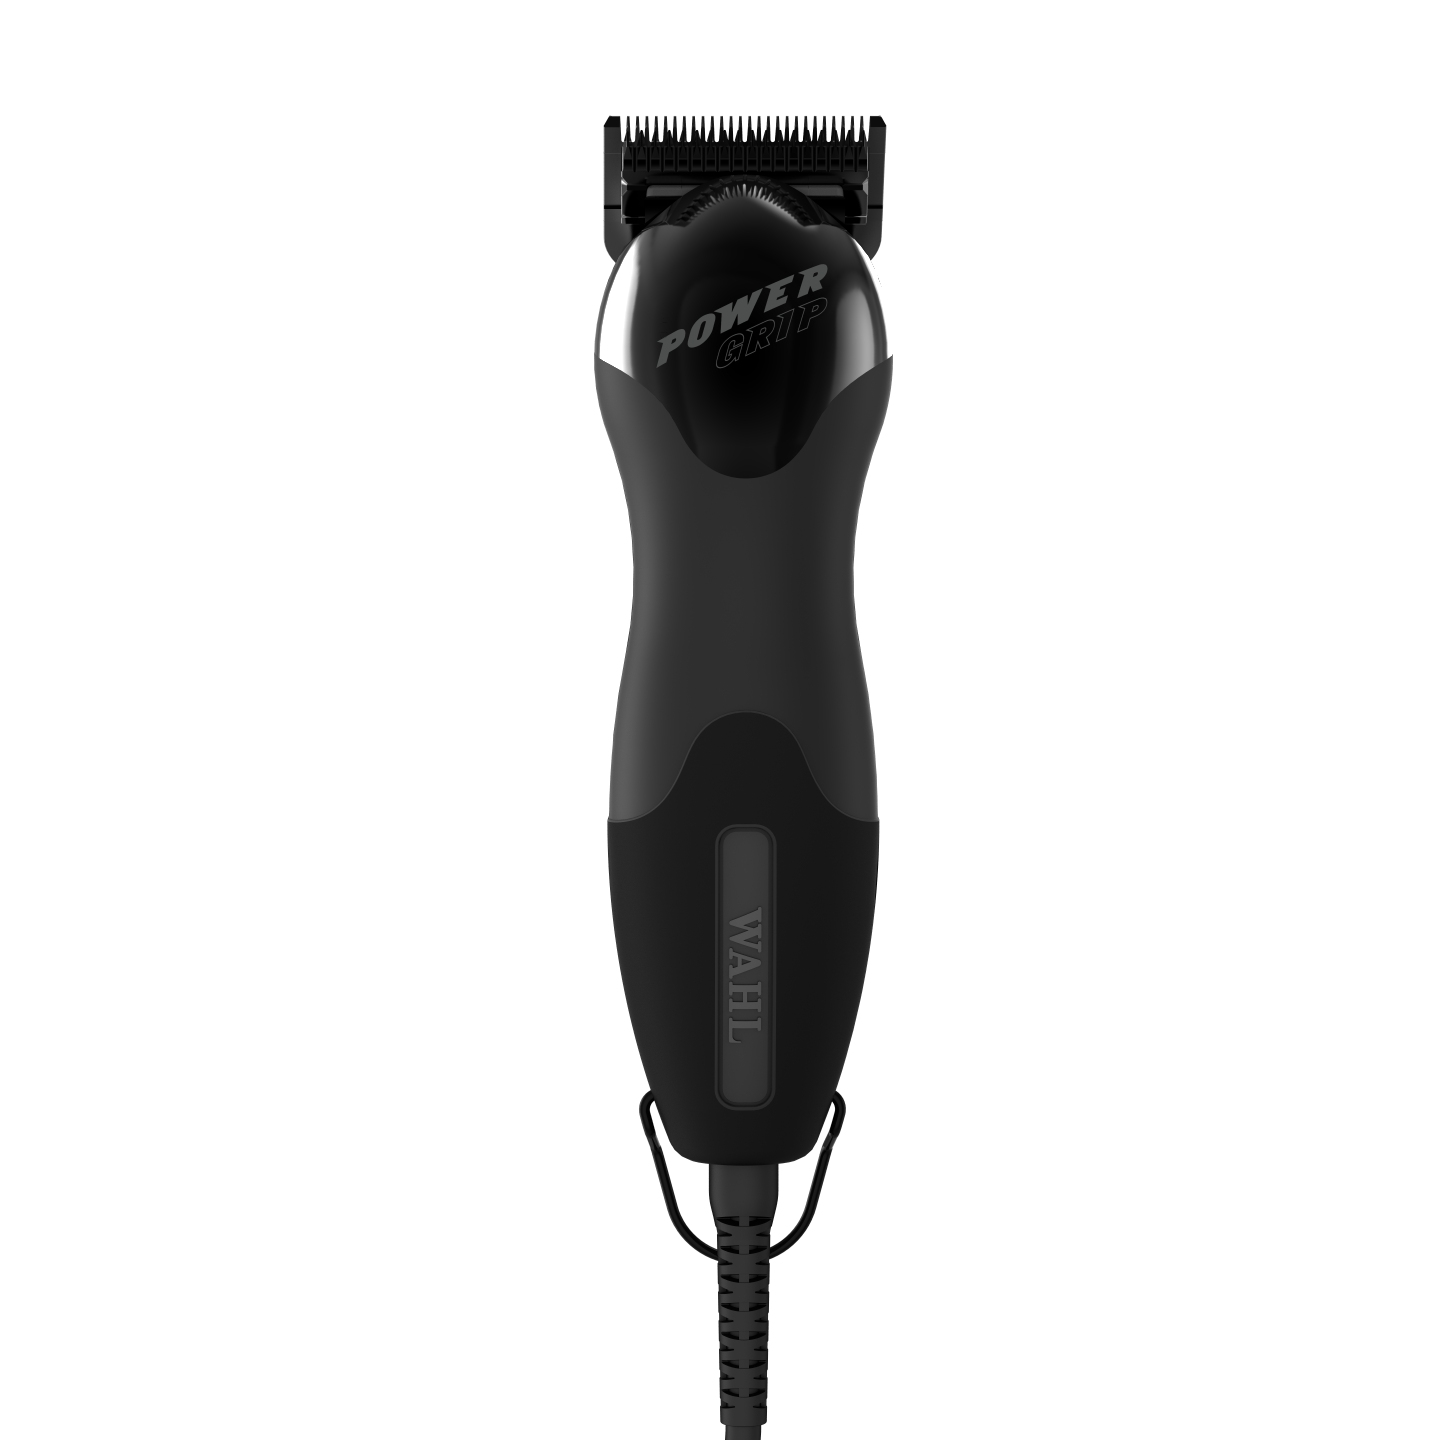 wahl pro grip dog clipper review